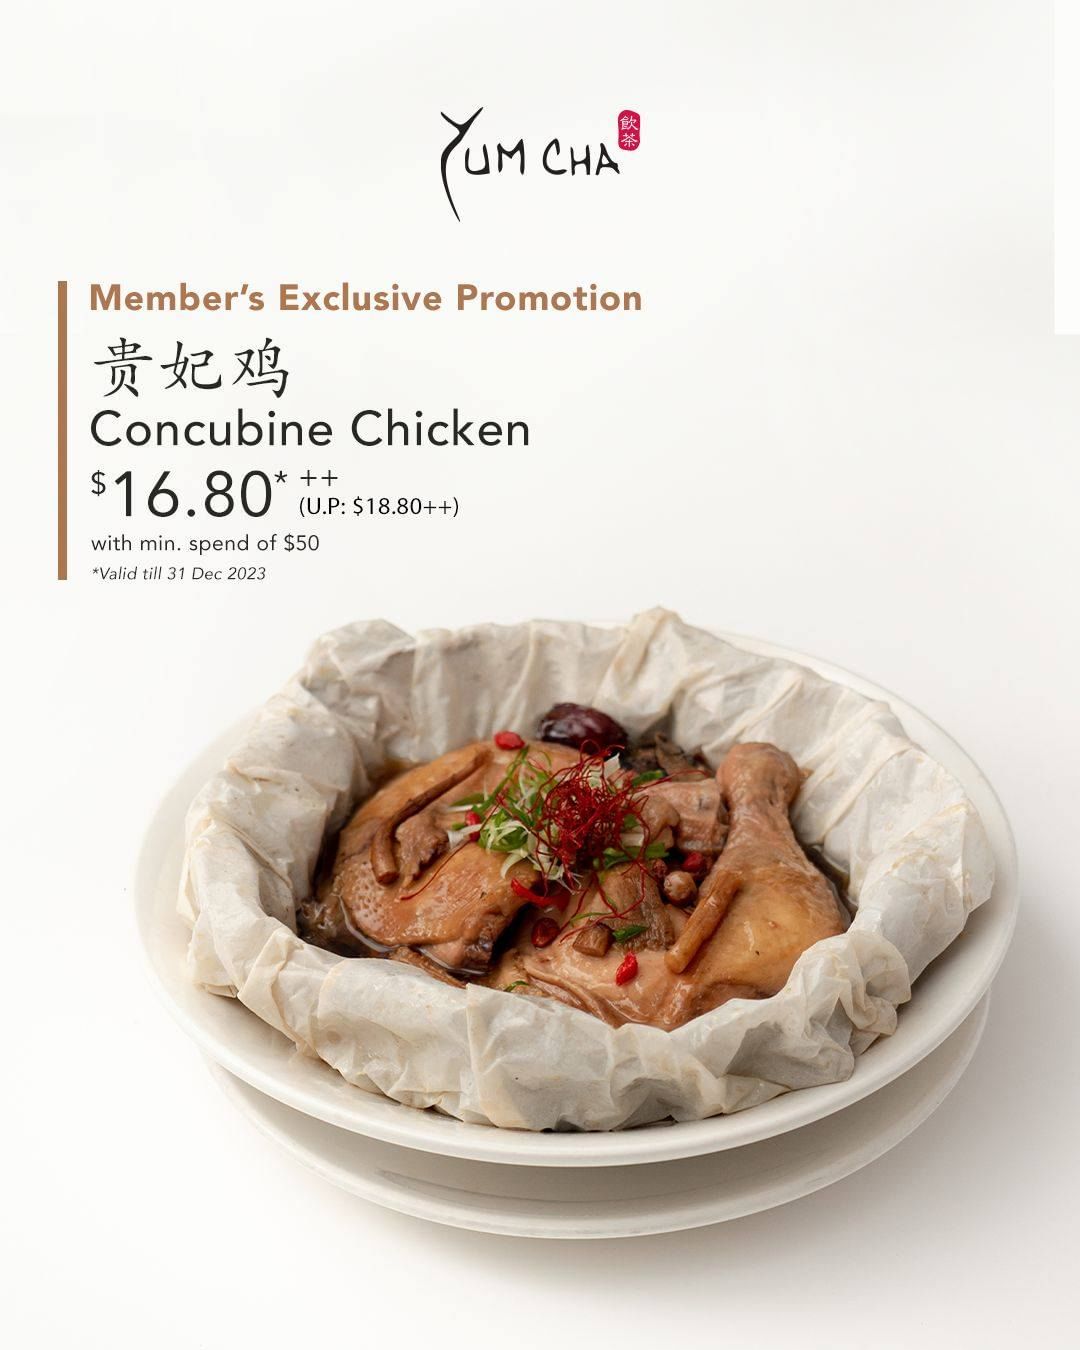 Yum Cha,Get Concubine Chicken at only $16.80